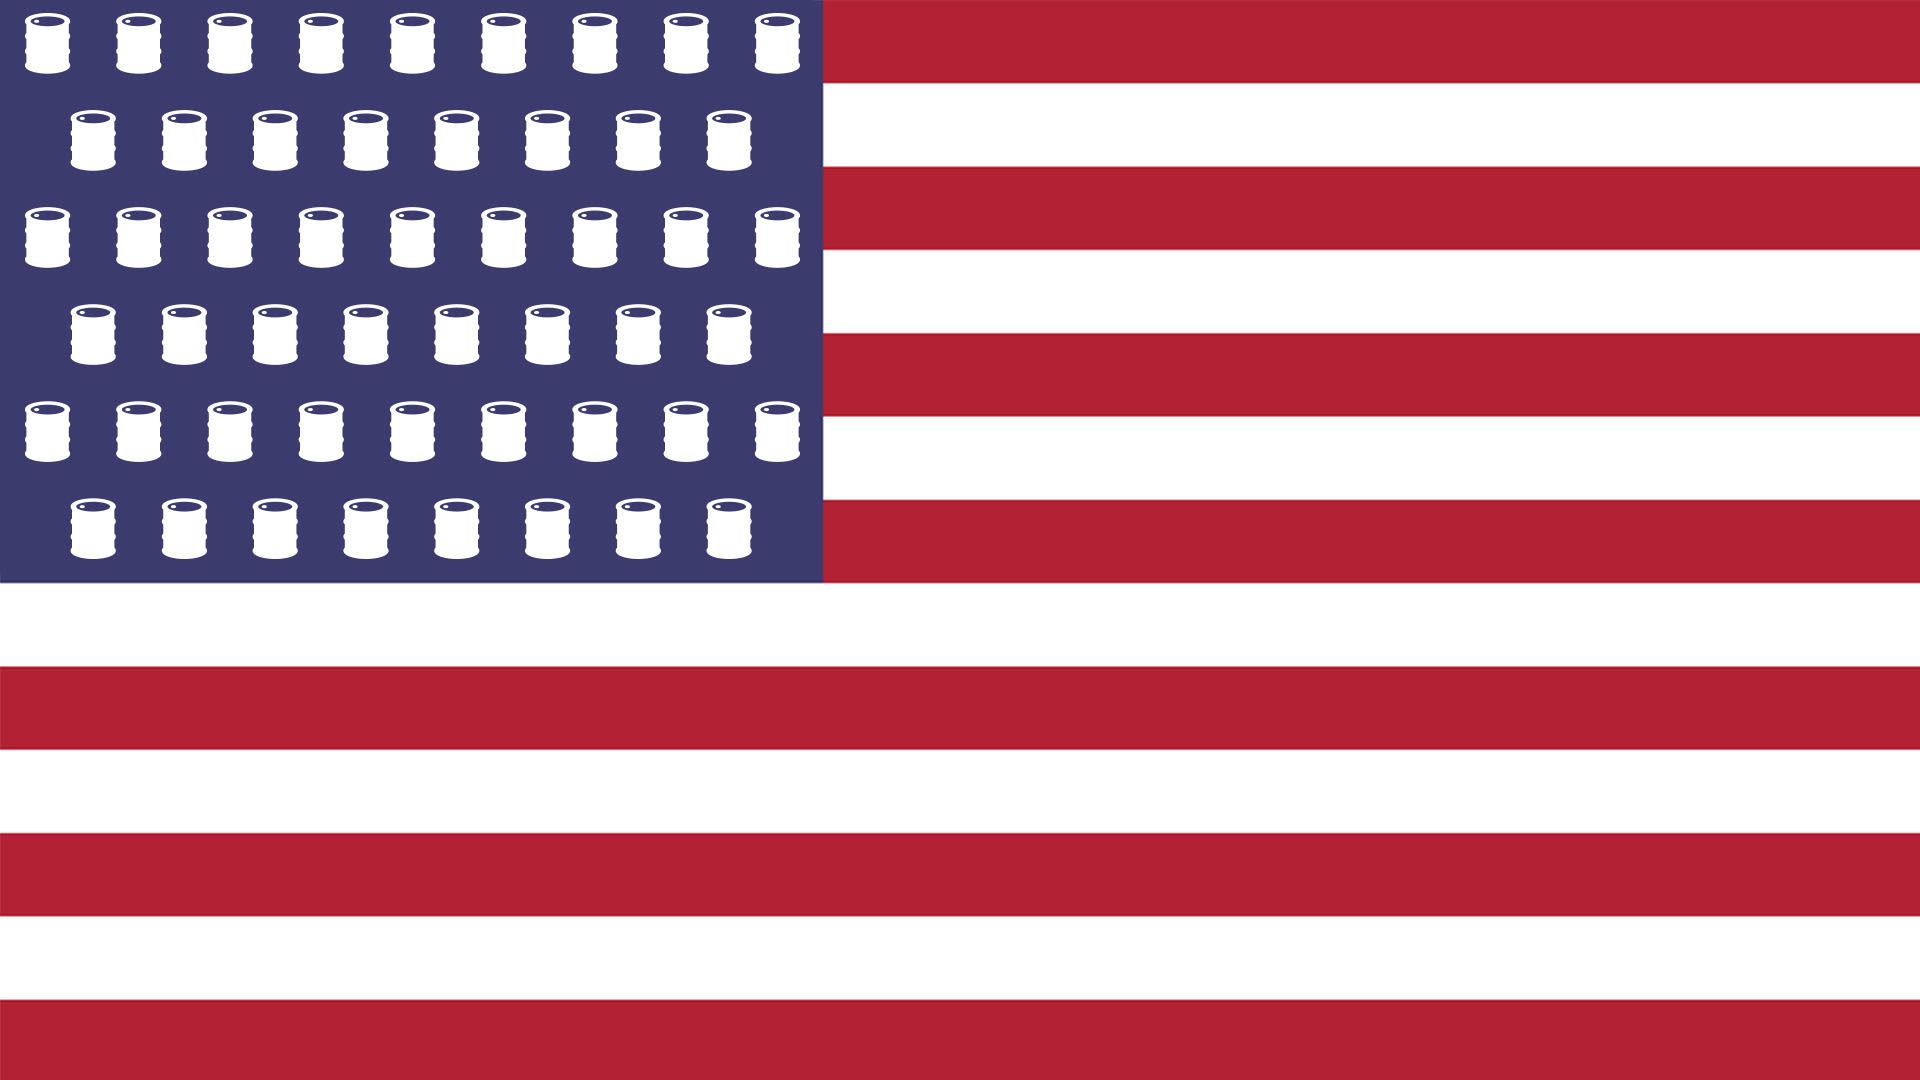 Illustration of an American flag with oil barrels instead of stars.